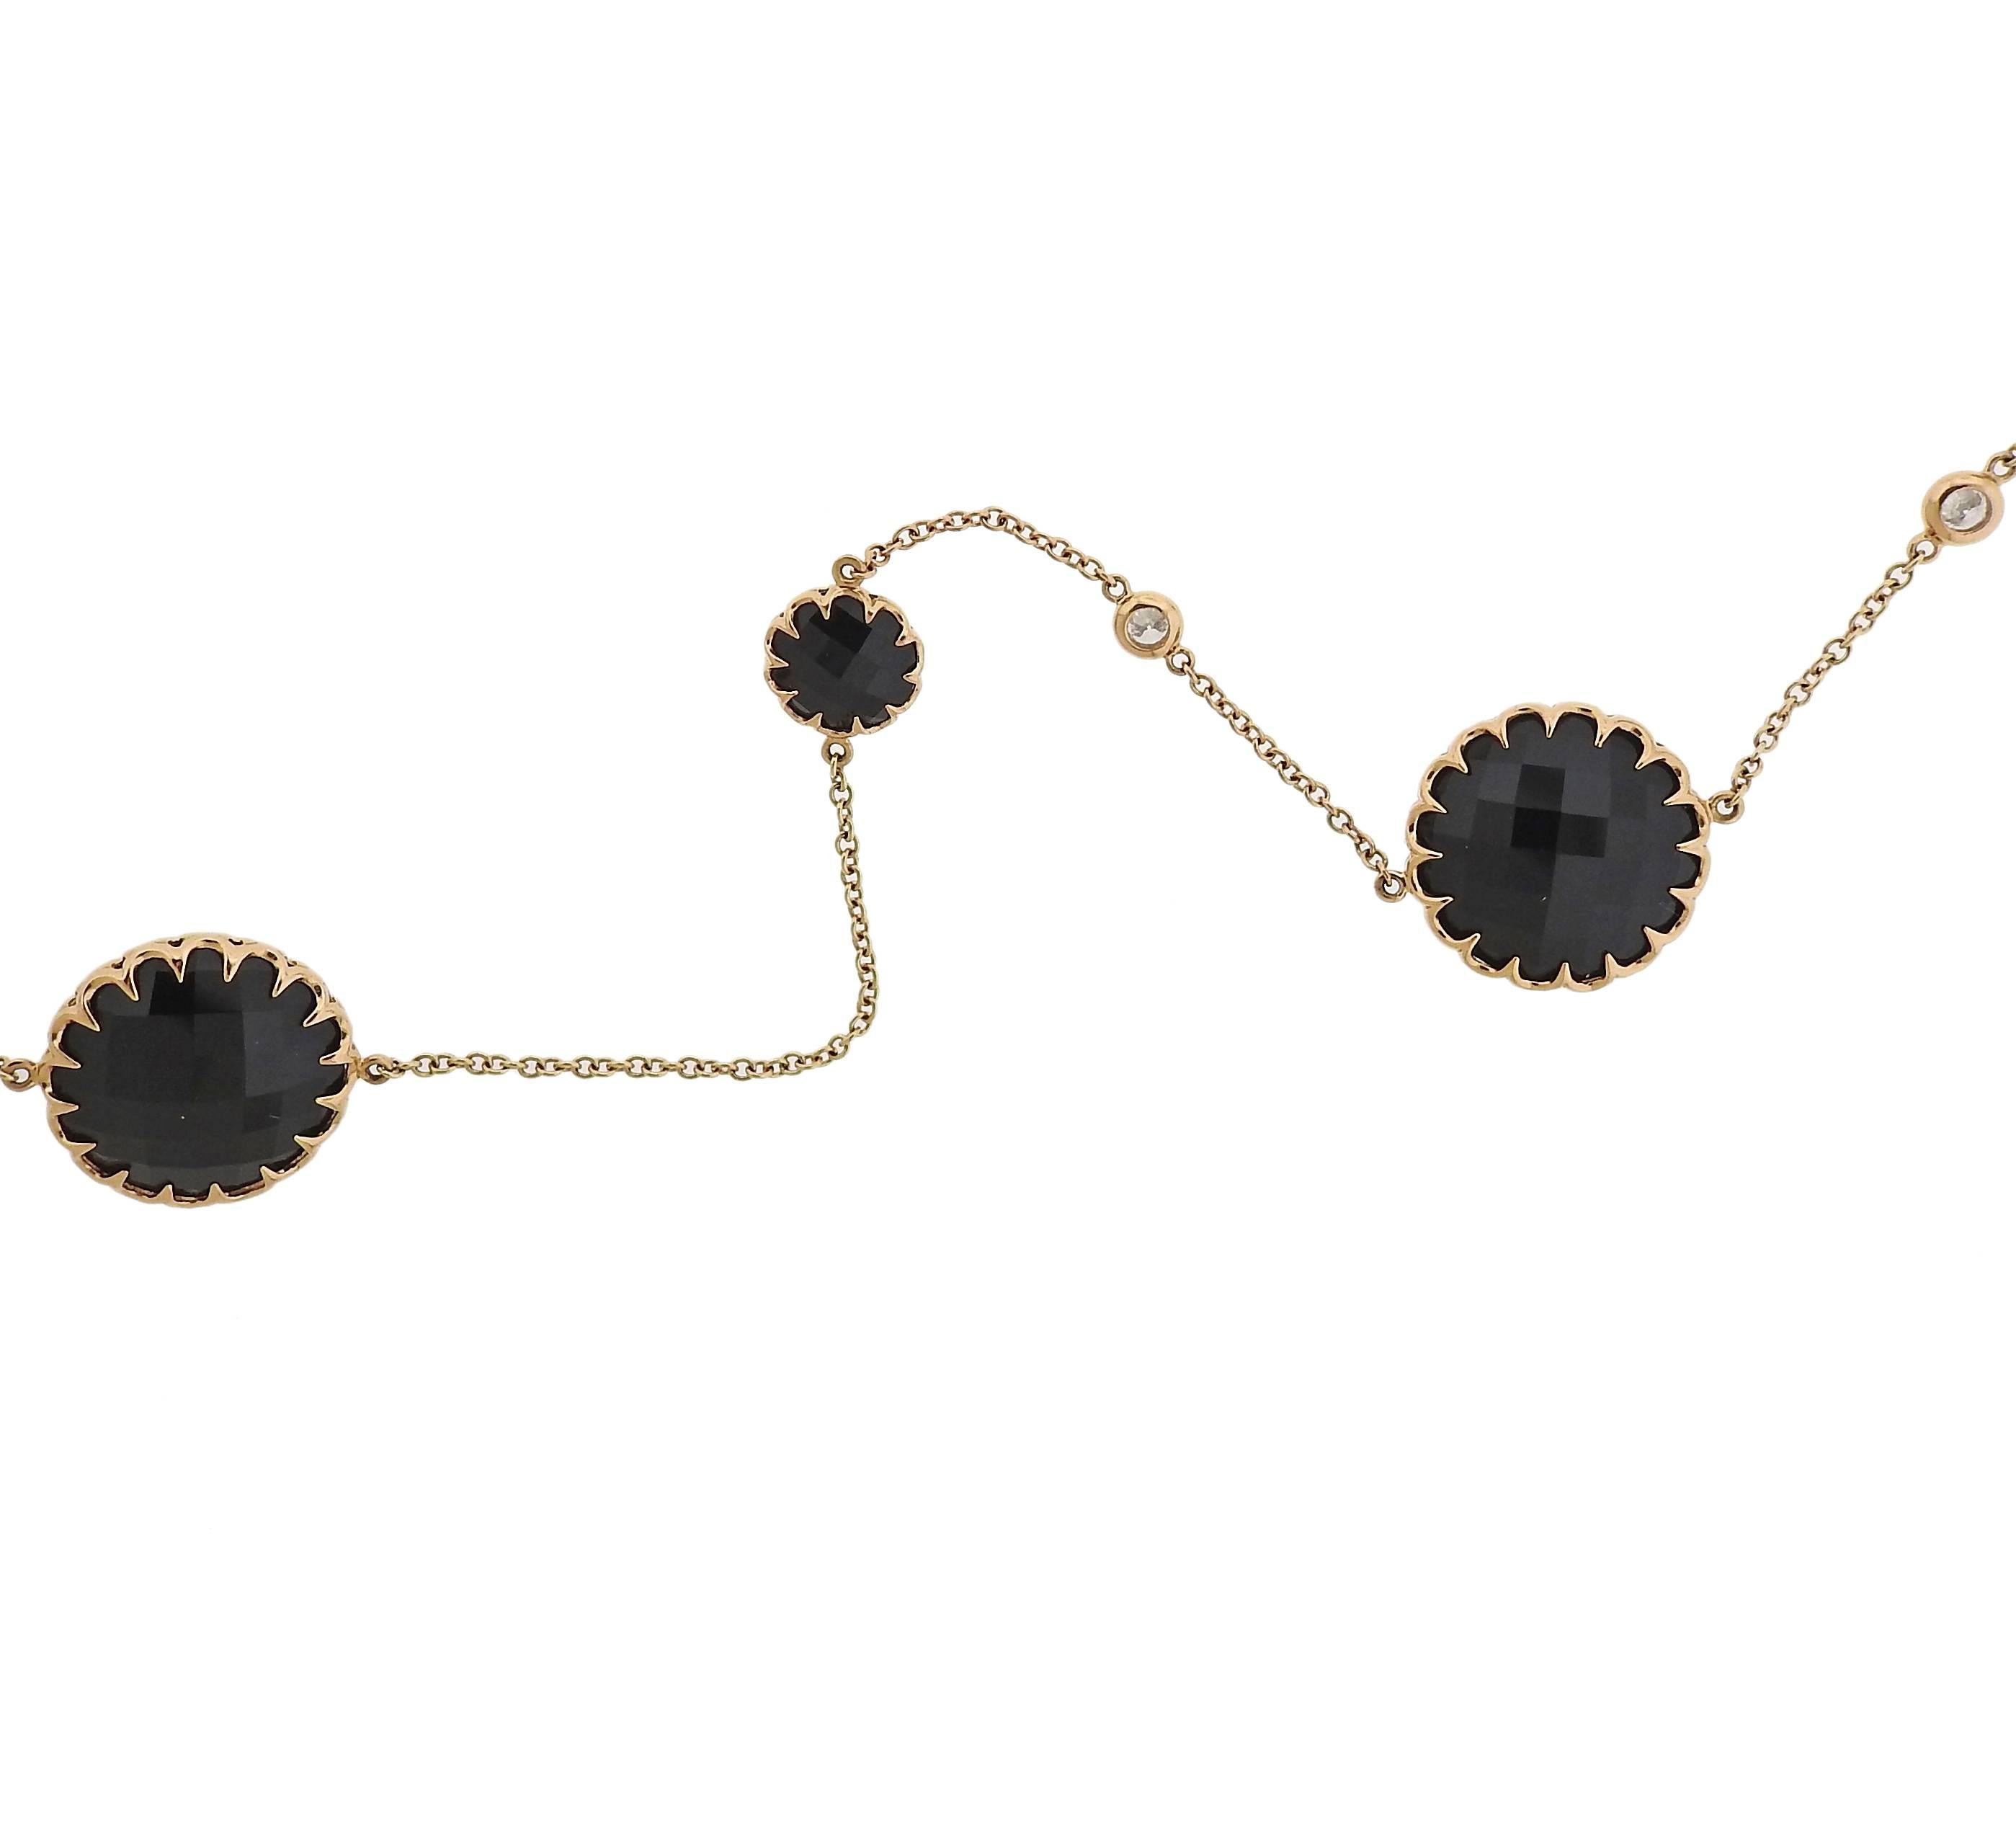 An 18k rose gold long necklace, crafted by Ivanka Trump, decorated with 9mm and 16.3mm faceted onyx station, and approx. 0.52ctw in G/VS diamonds. Necklace is 40" long. Marked: Ivanka Trump, 750, N8861. Weight - 30.9 grams 
Retail $4680